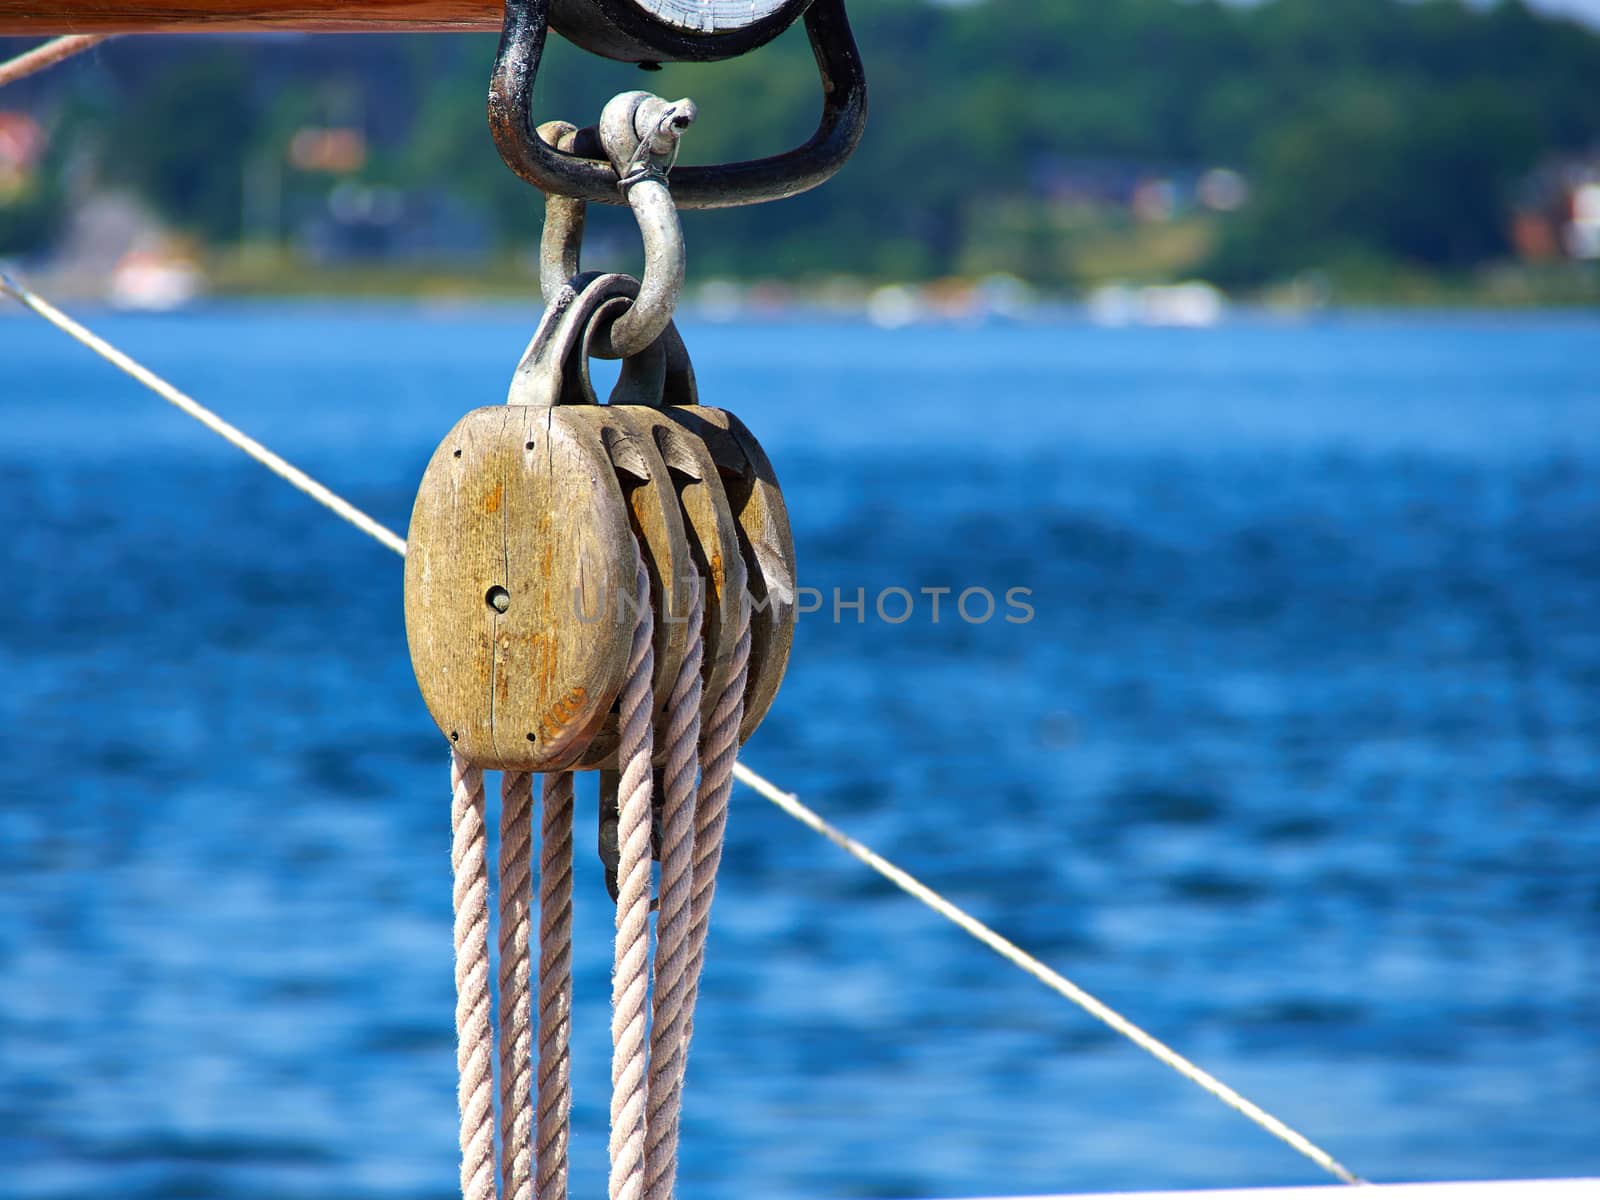 Sails ropes pulley by Ronyzmbow